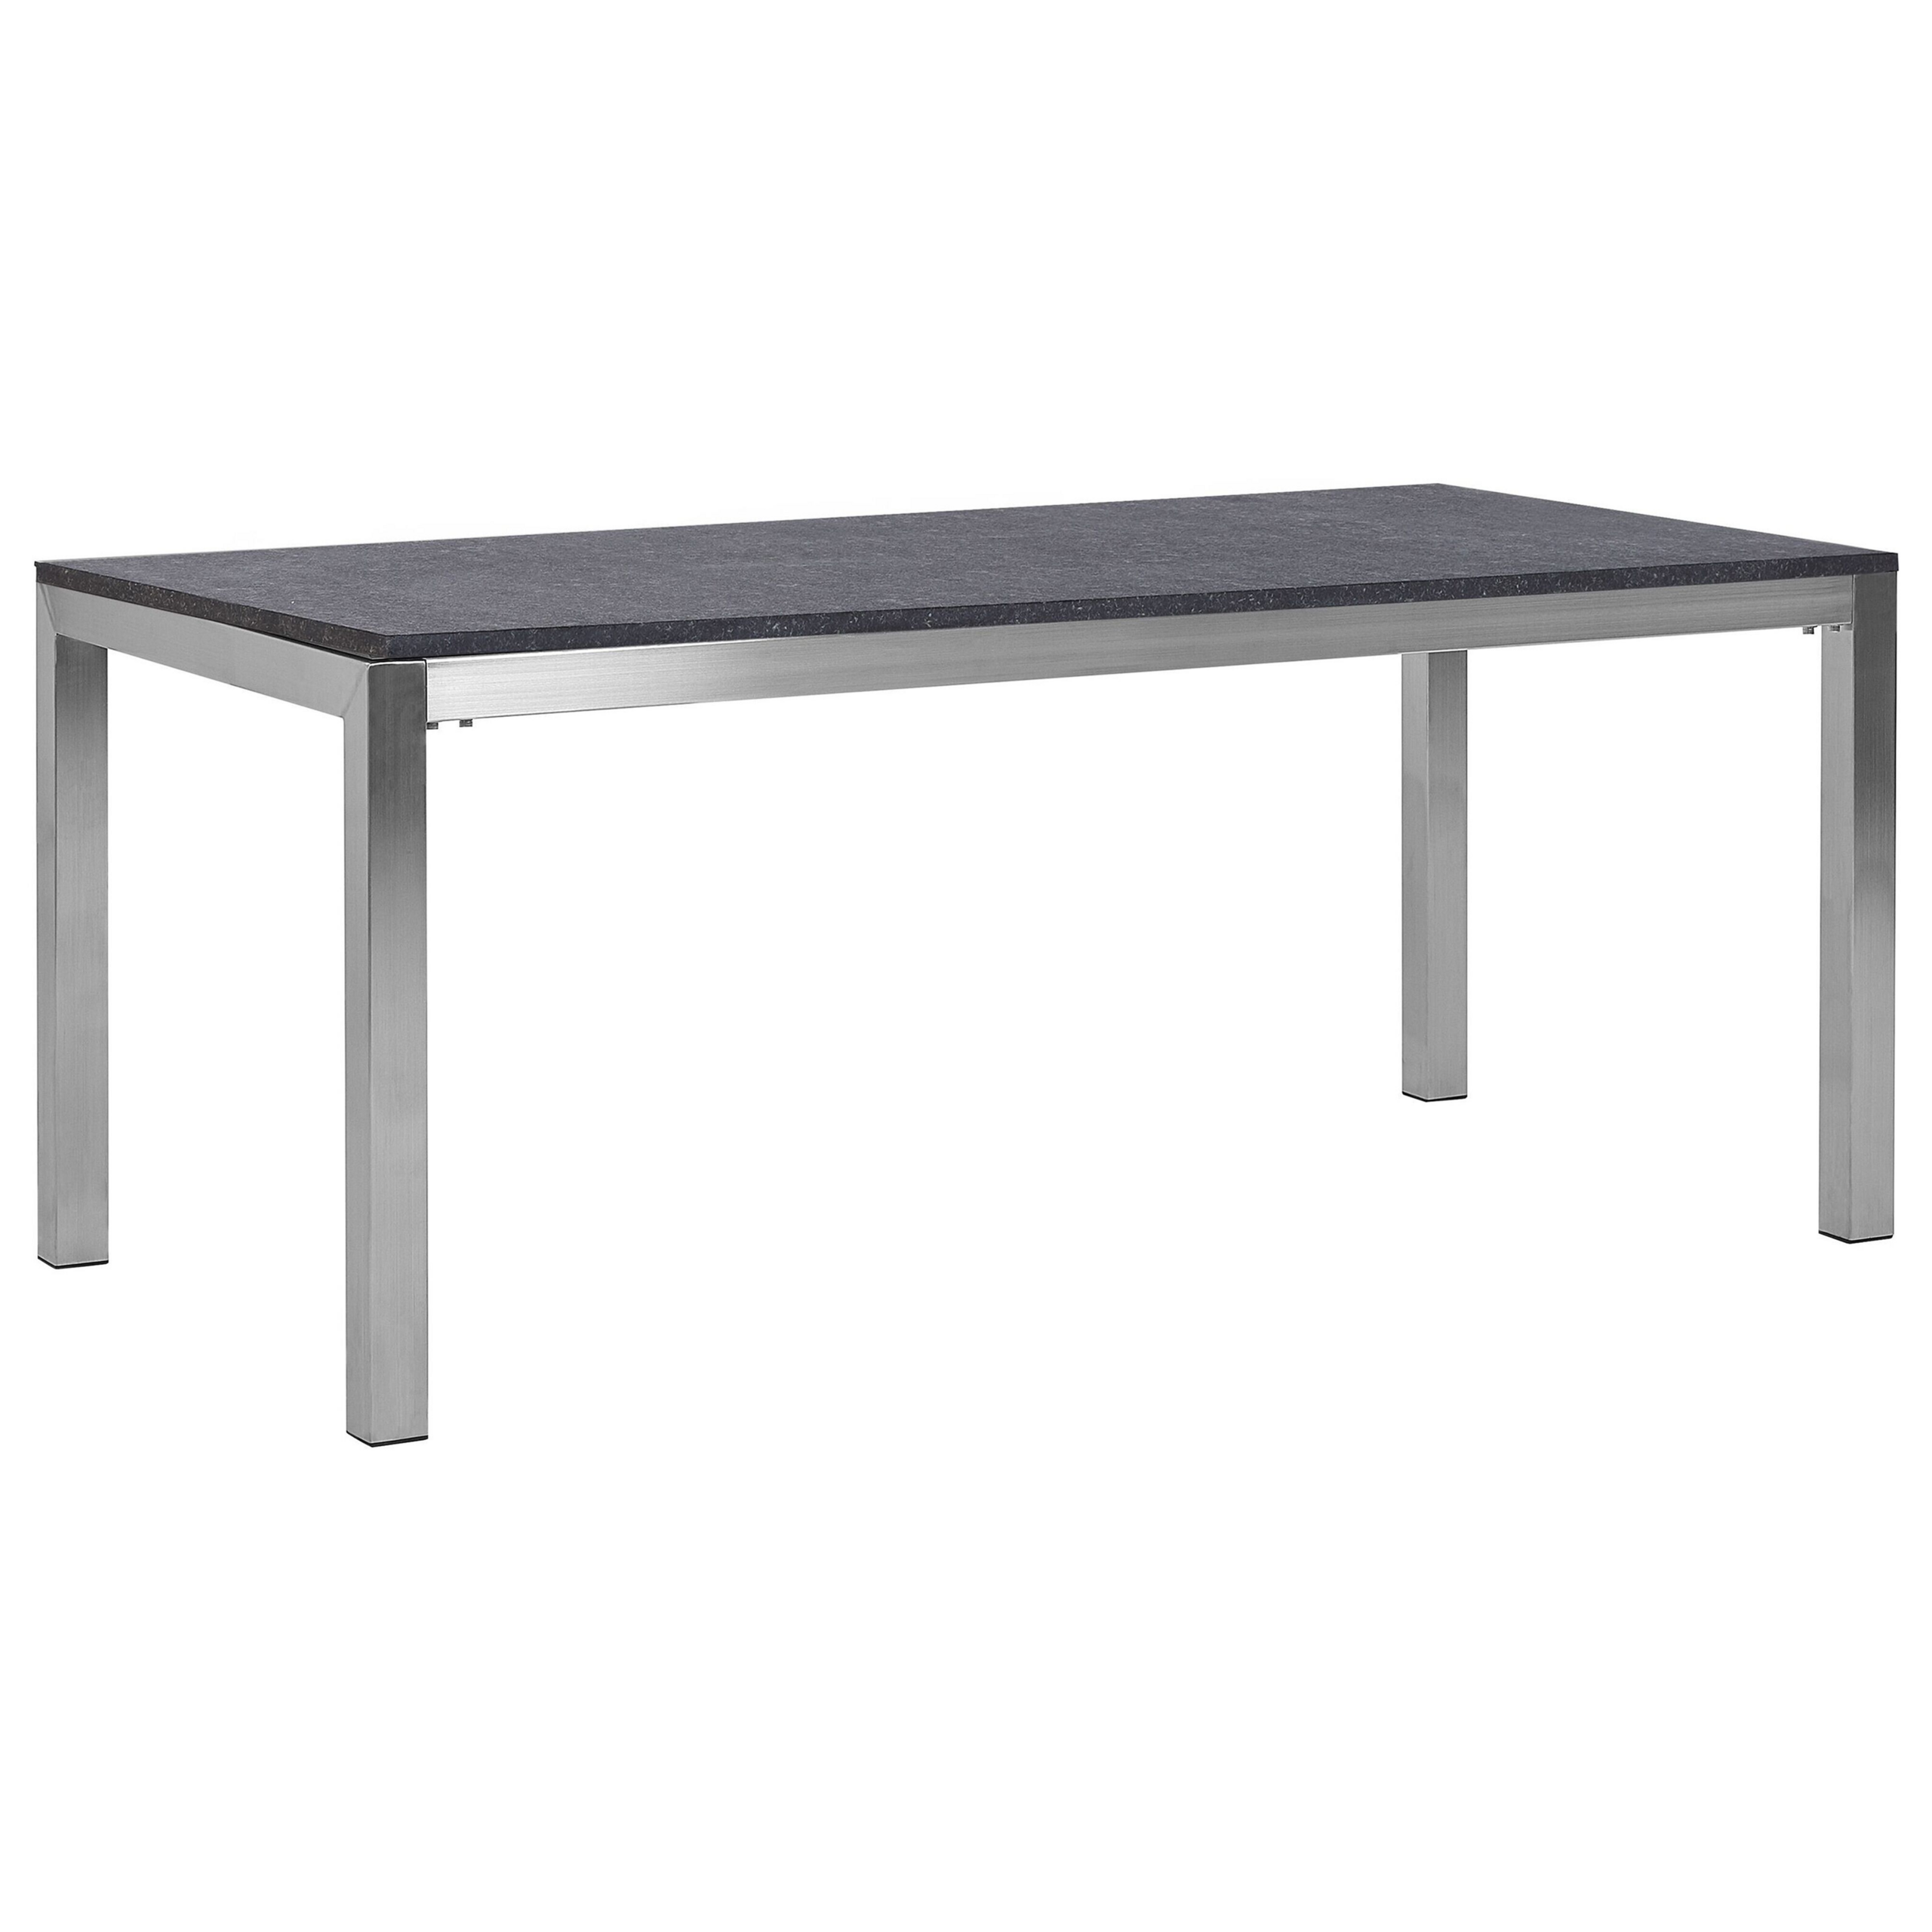 Beliani Garden Dining Table Grey and Silver Granite Table Top Stainless Steel Legs Outdoor Resistances 6 Seater 180 x 90 x 74 cm